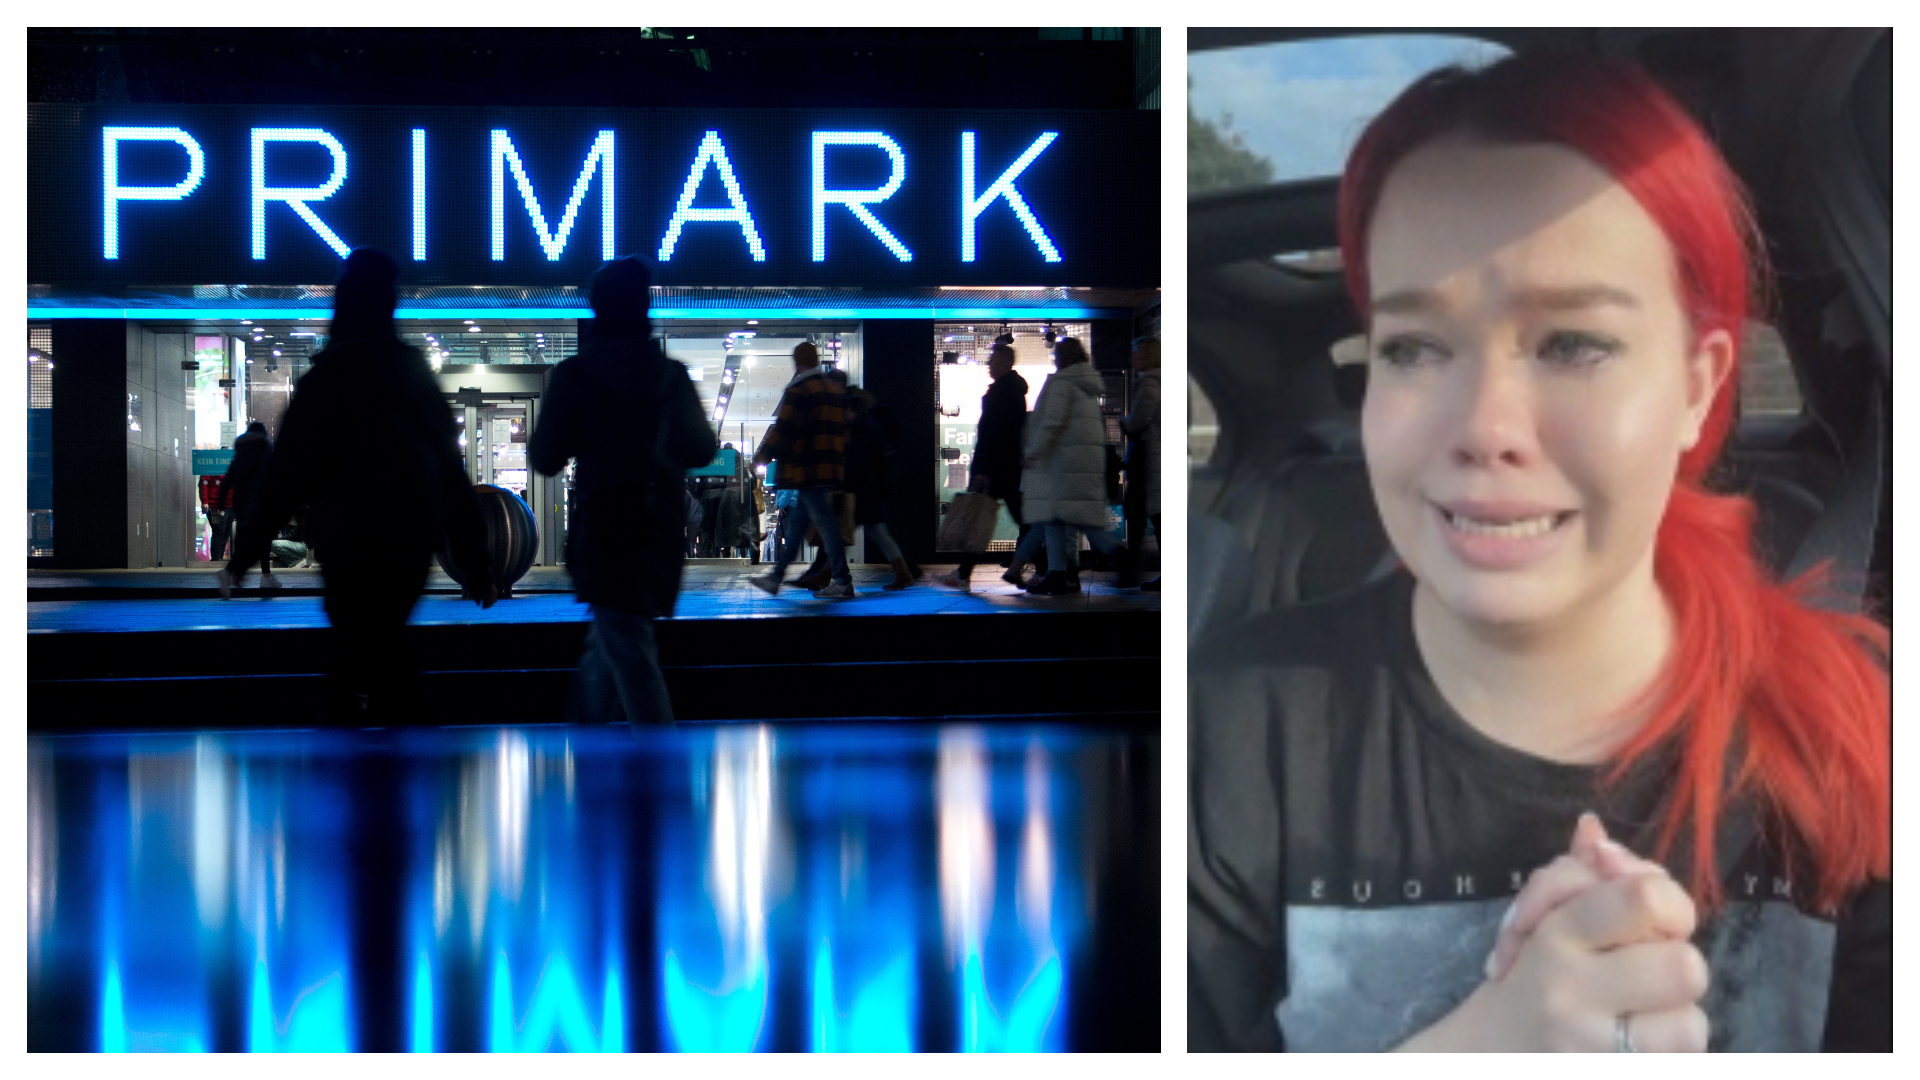 Primark to review unisex changing rooms policy after two men walk in on woman at Cambridge store ITV News Anglia photo